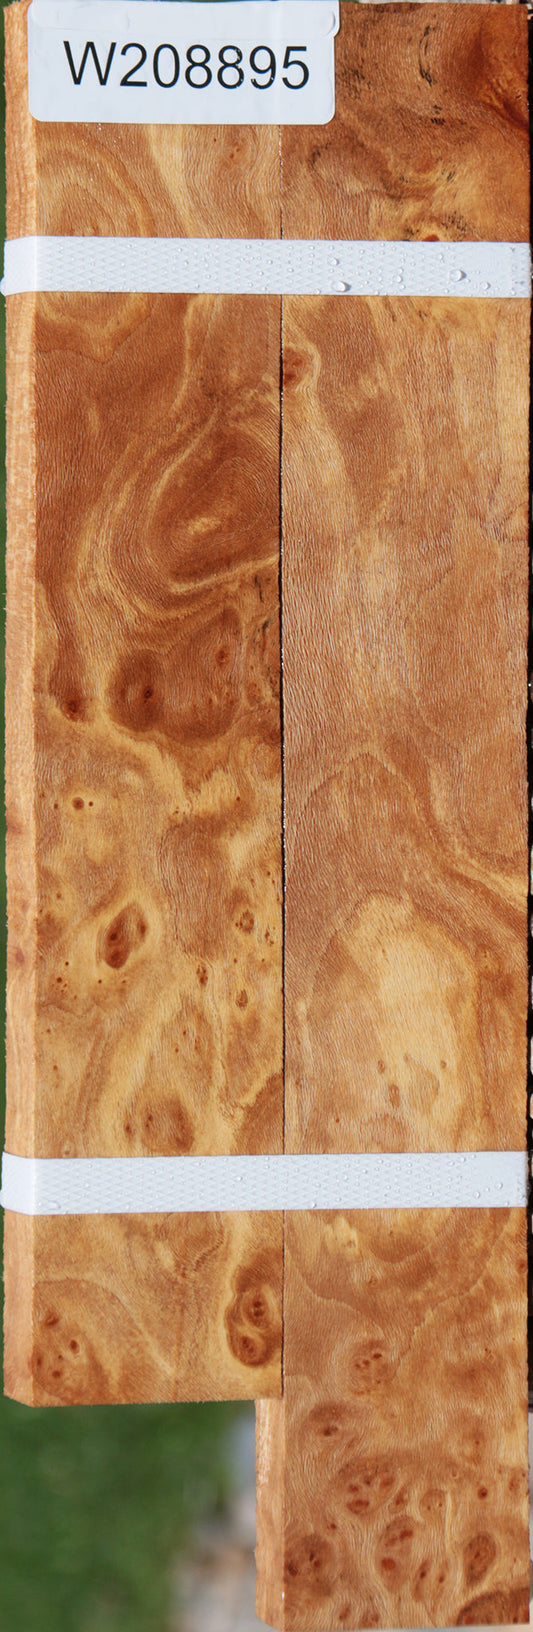 Extra Fancy Sycamore Burl Lumber 2-Pack